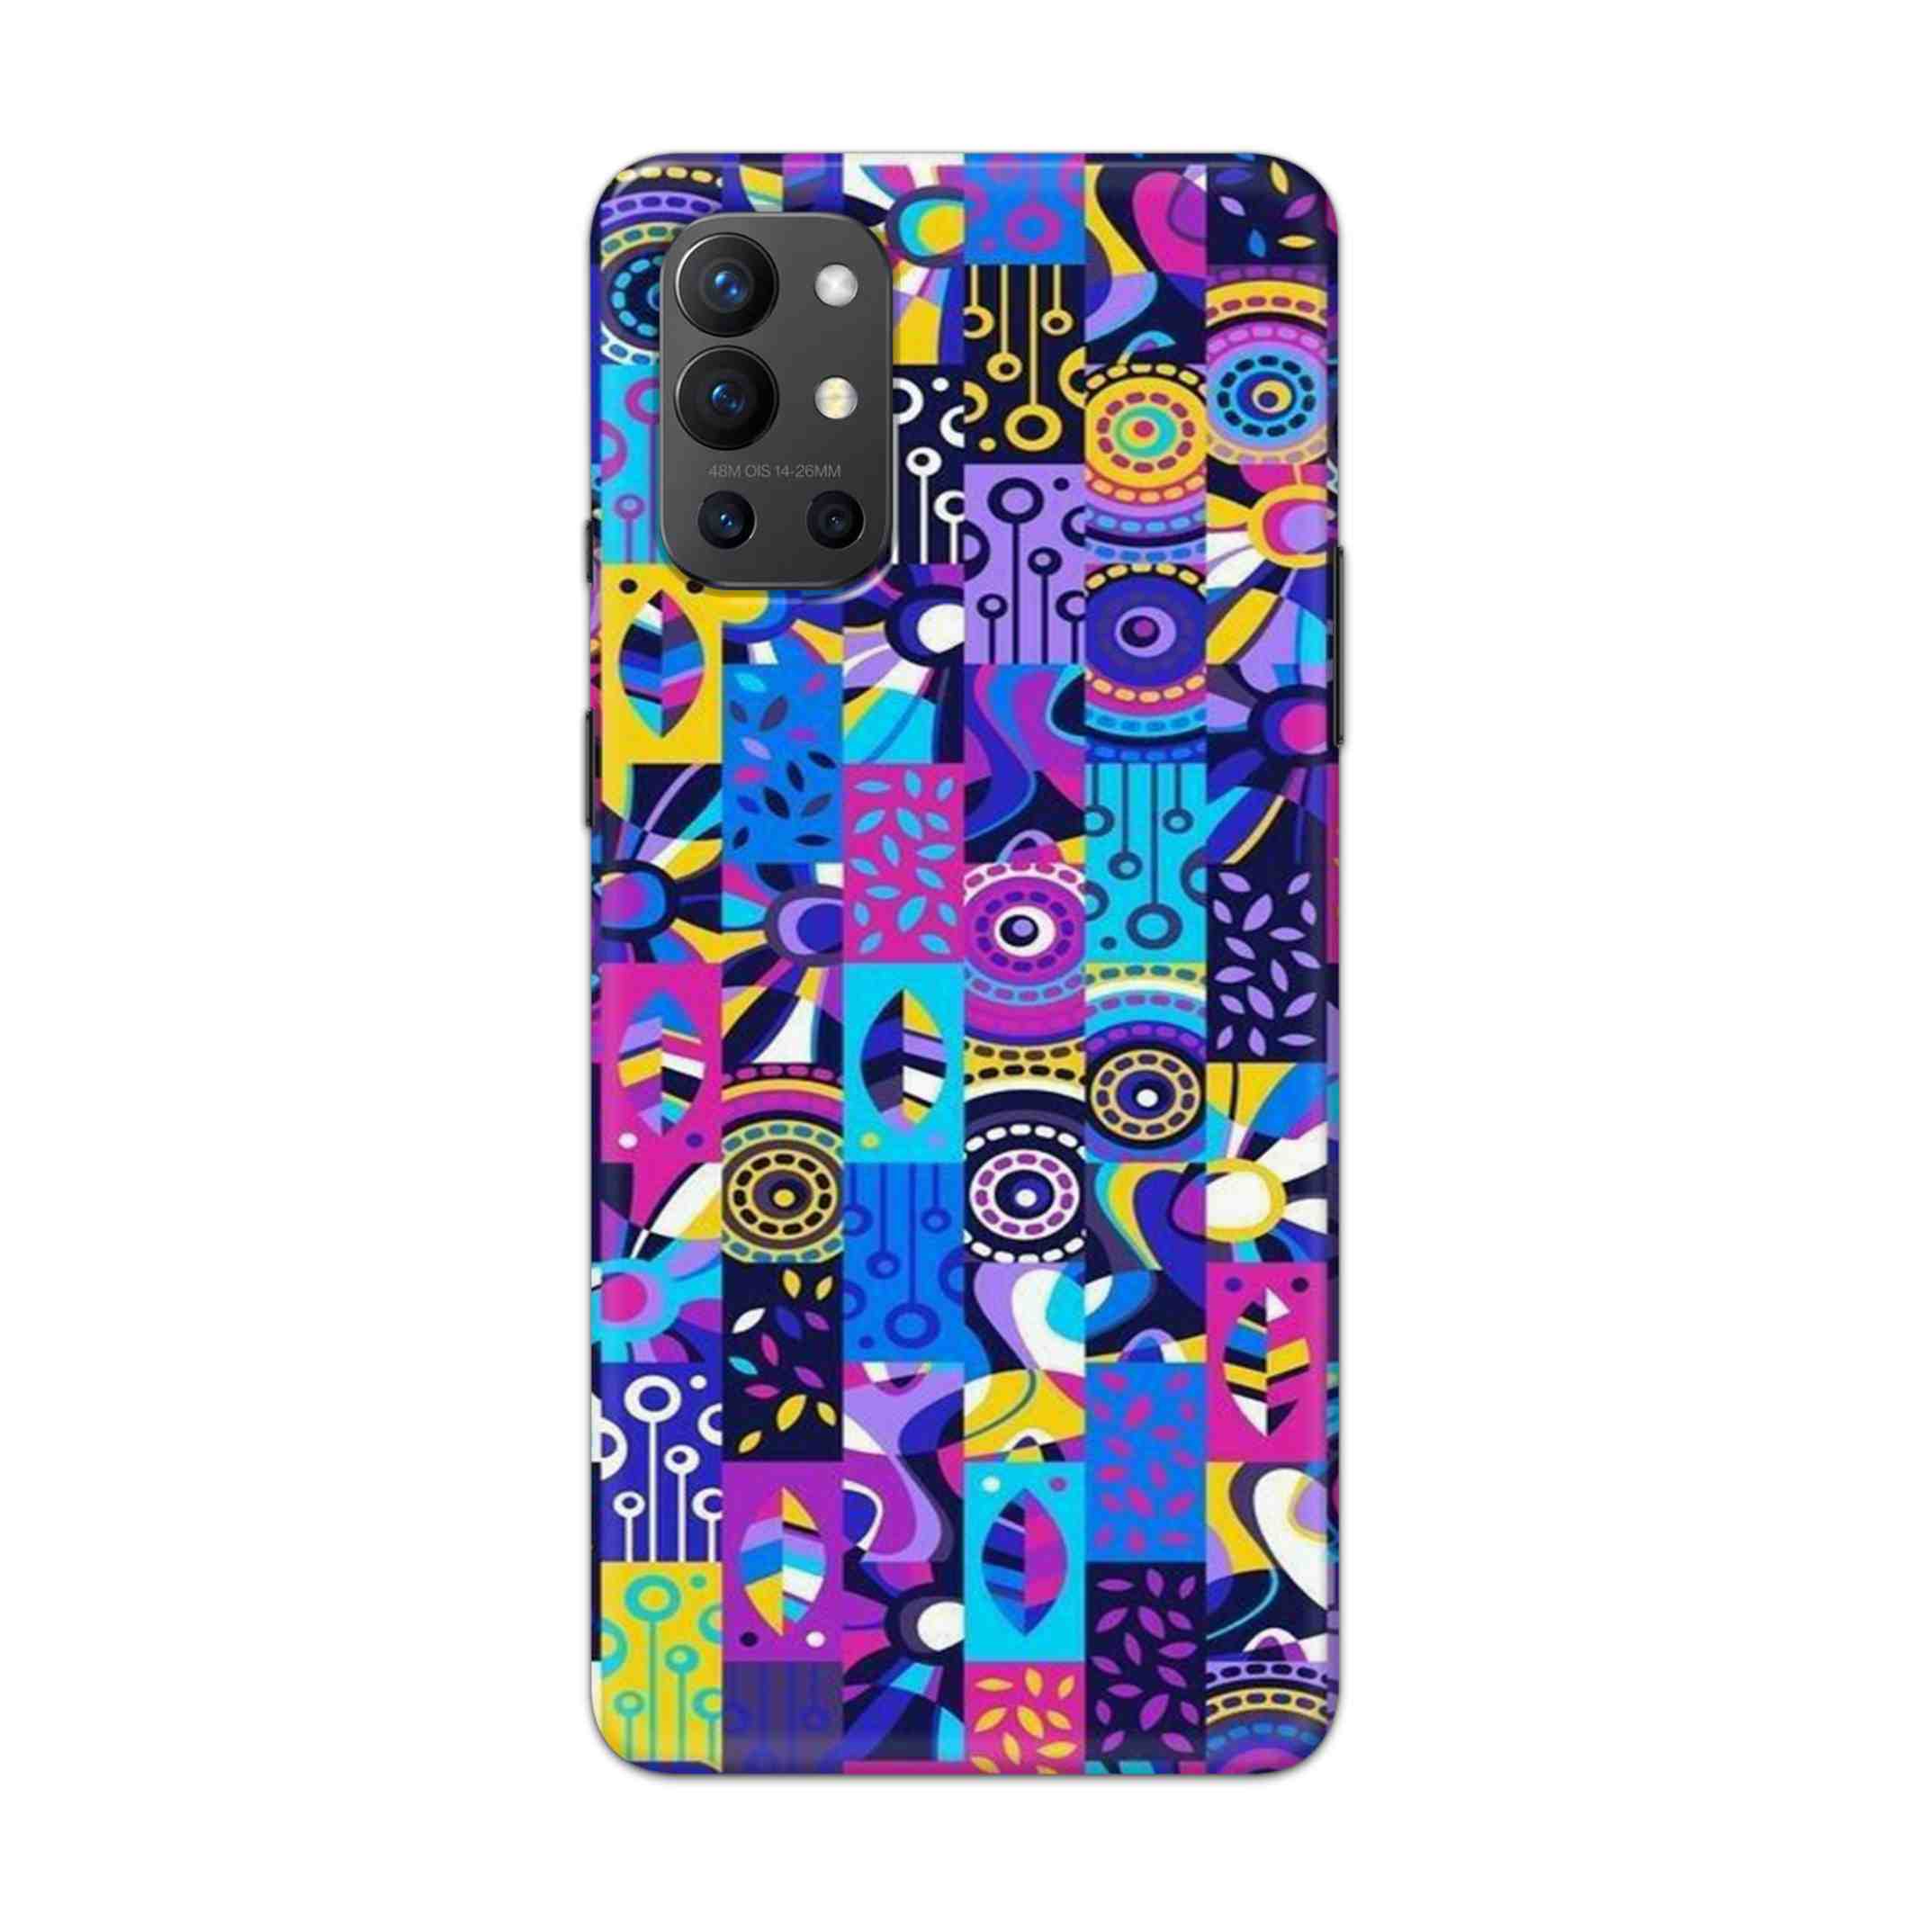 Buy Rainbow Art Hard Back Mobile Phone Case Cover For OnePlus 9R / 8T Online